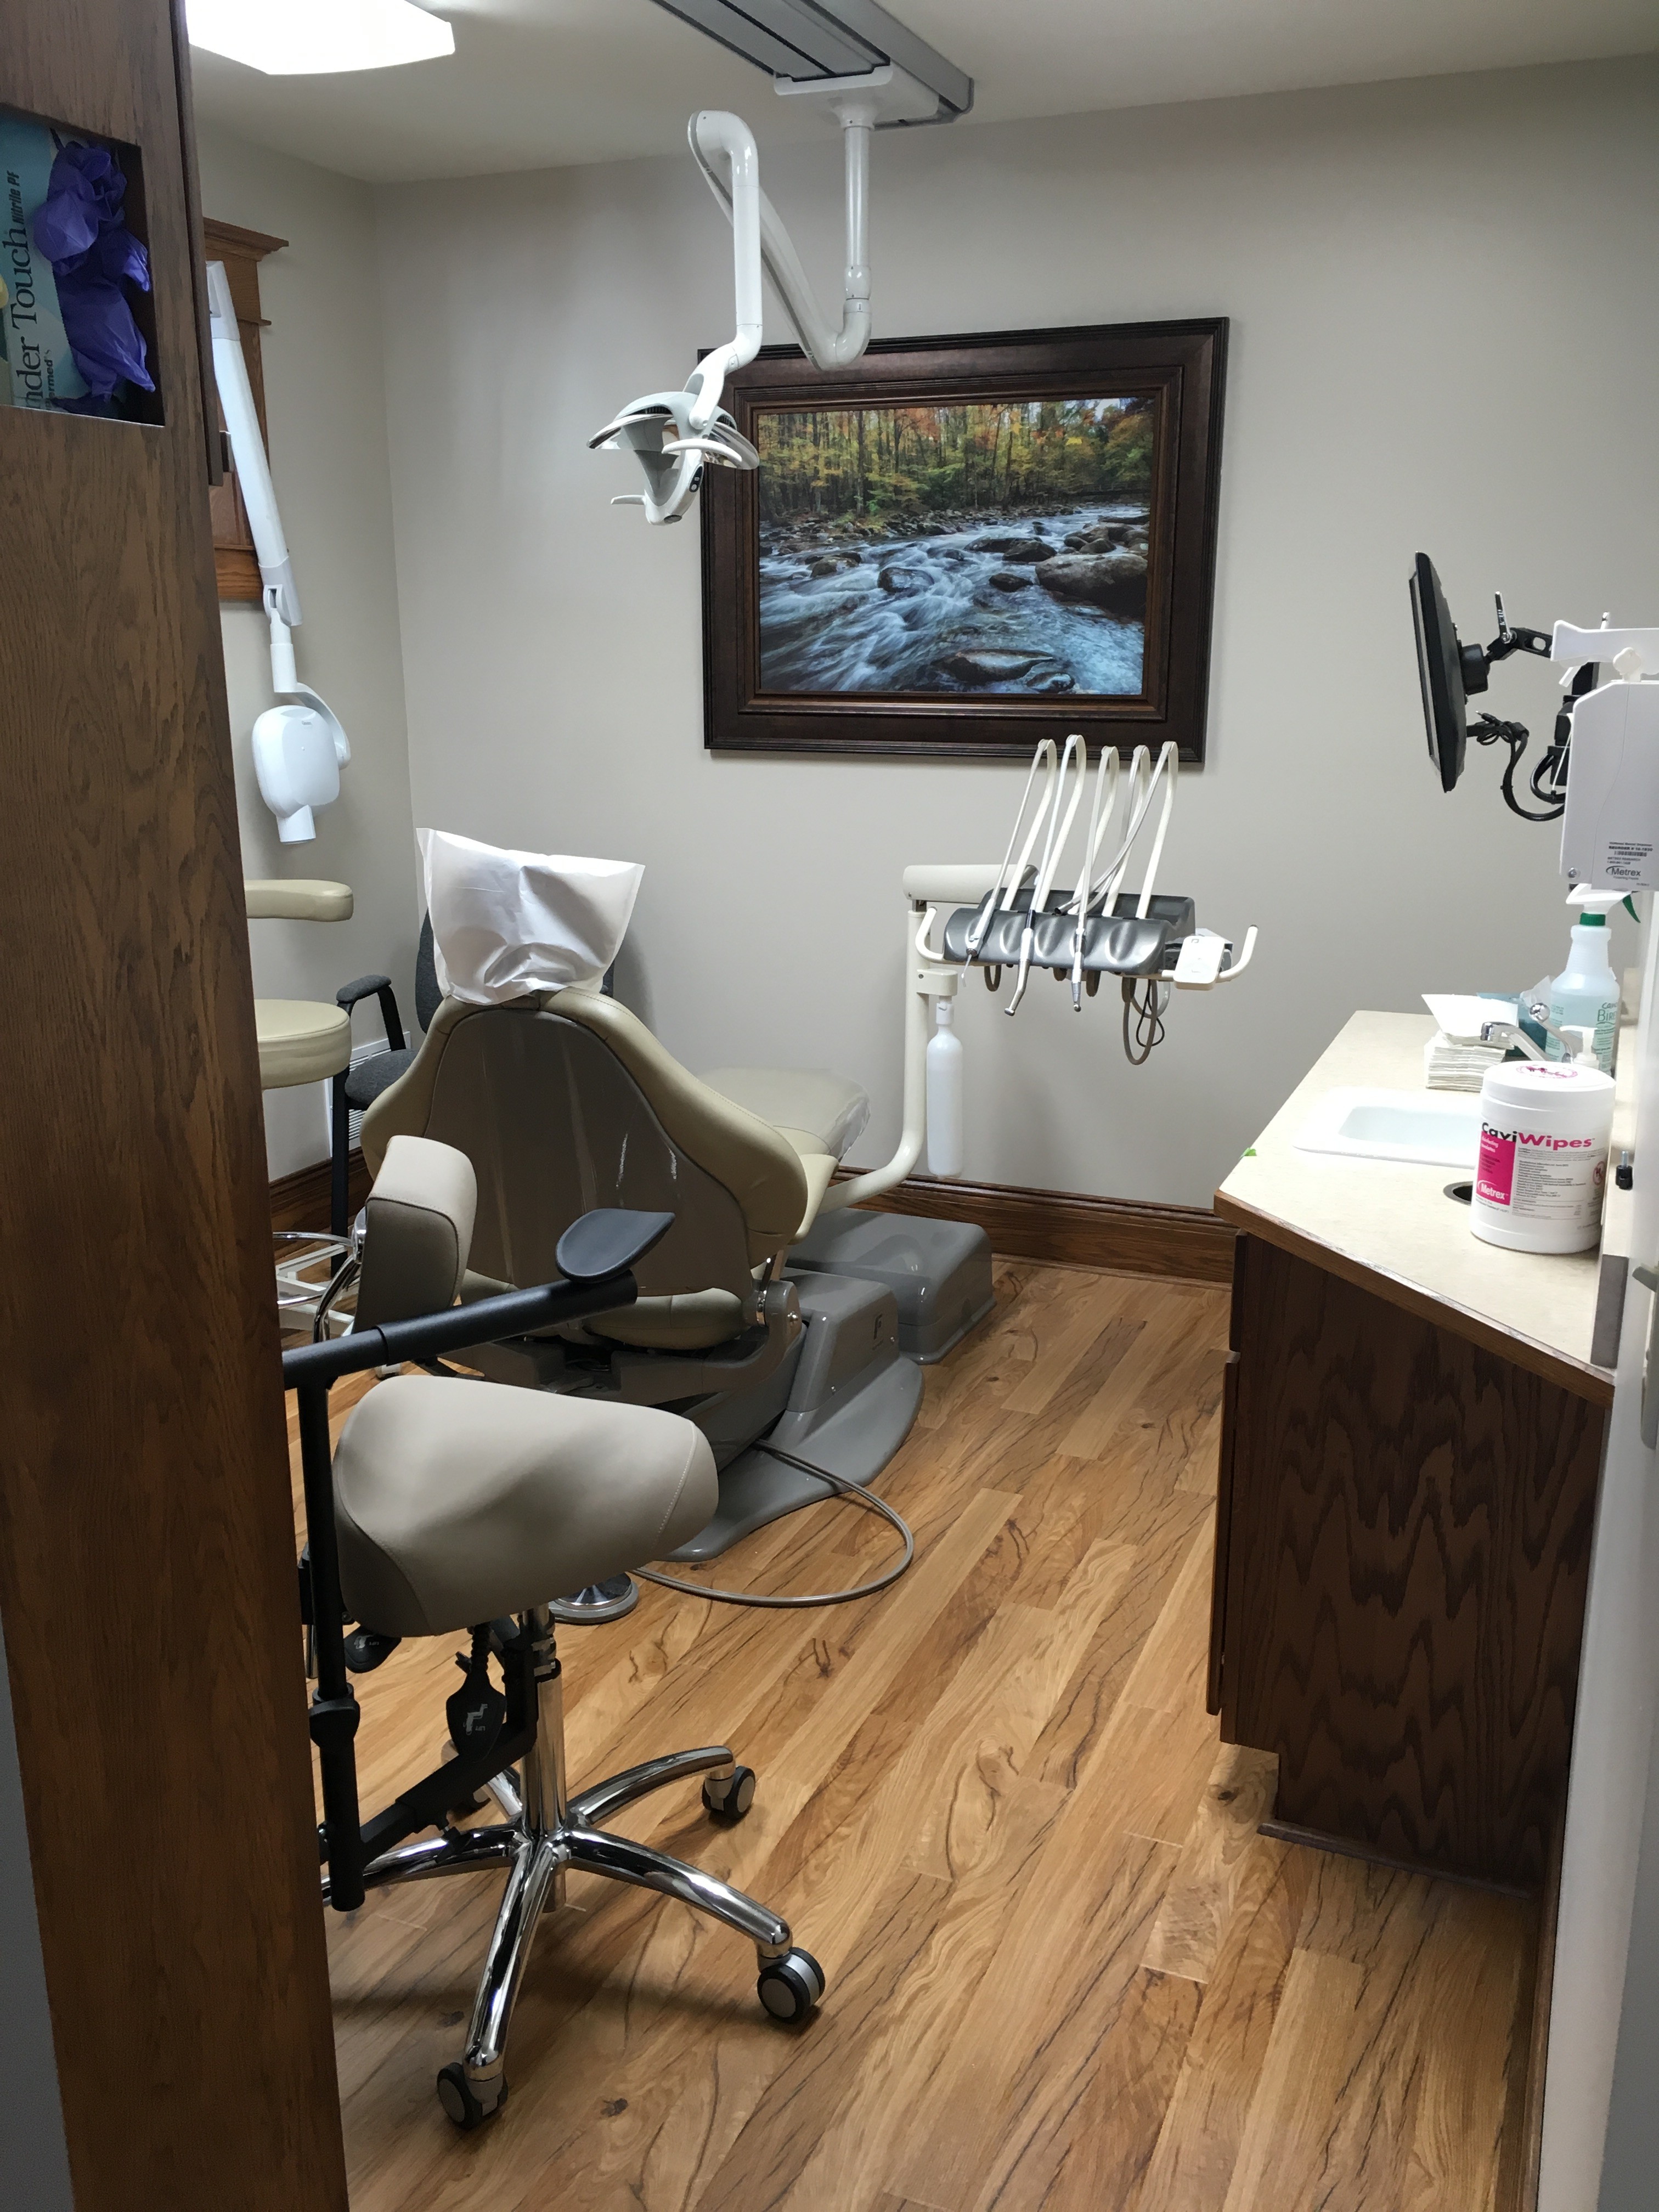 Two treatment rooms were added giving us more space for patient care and increased flexibility for scheduling cosmetic treatments such as our in-office Zoom bleaching system.